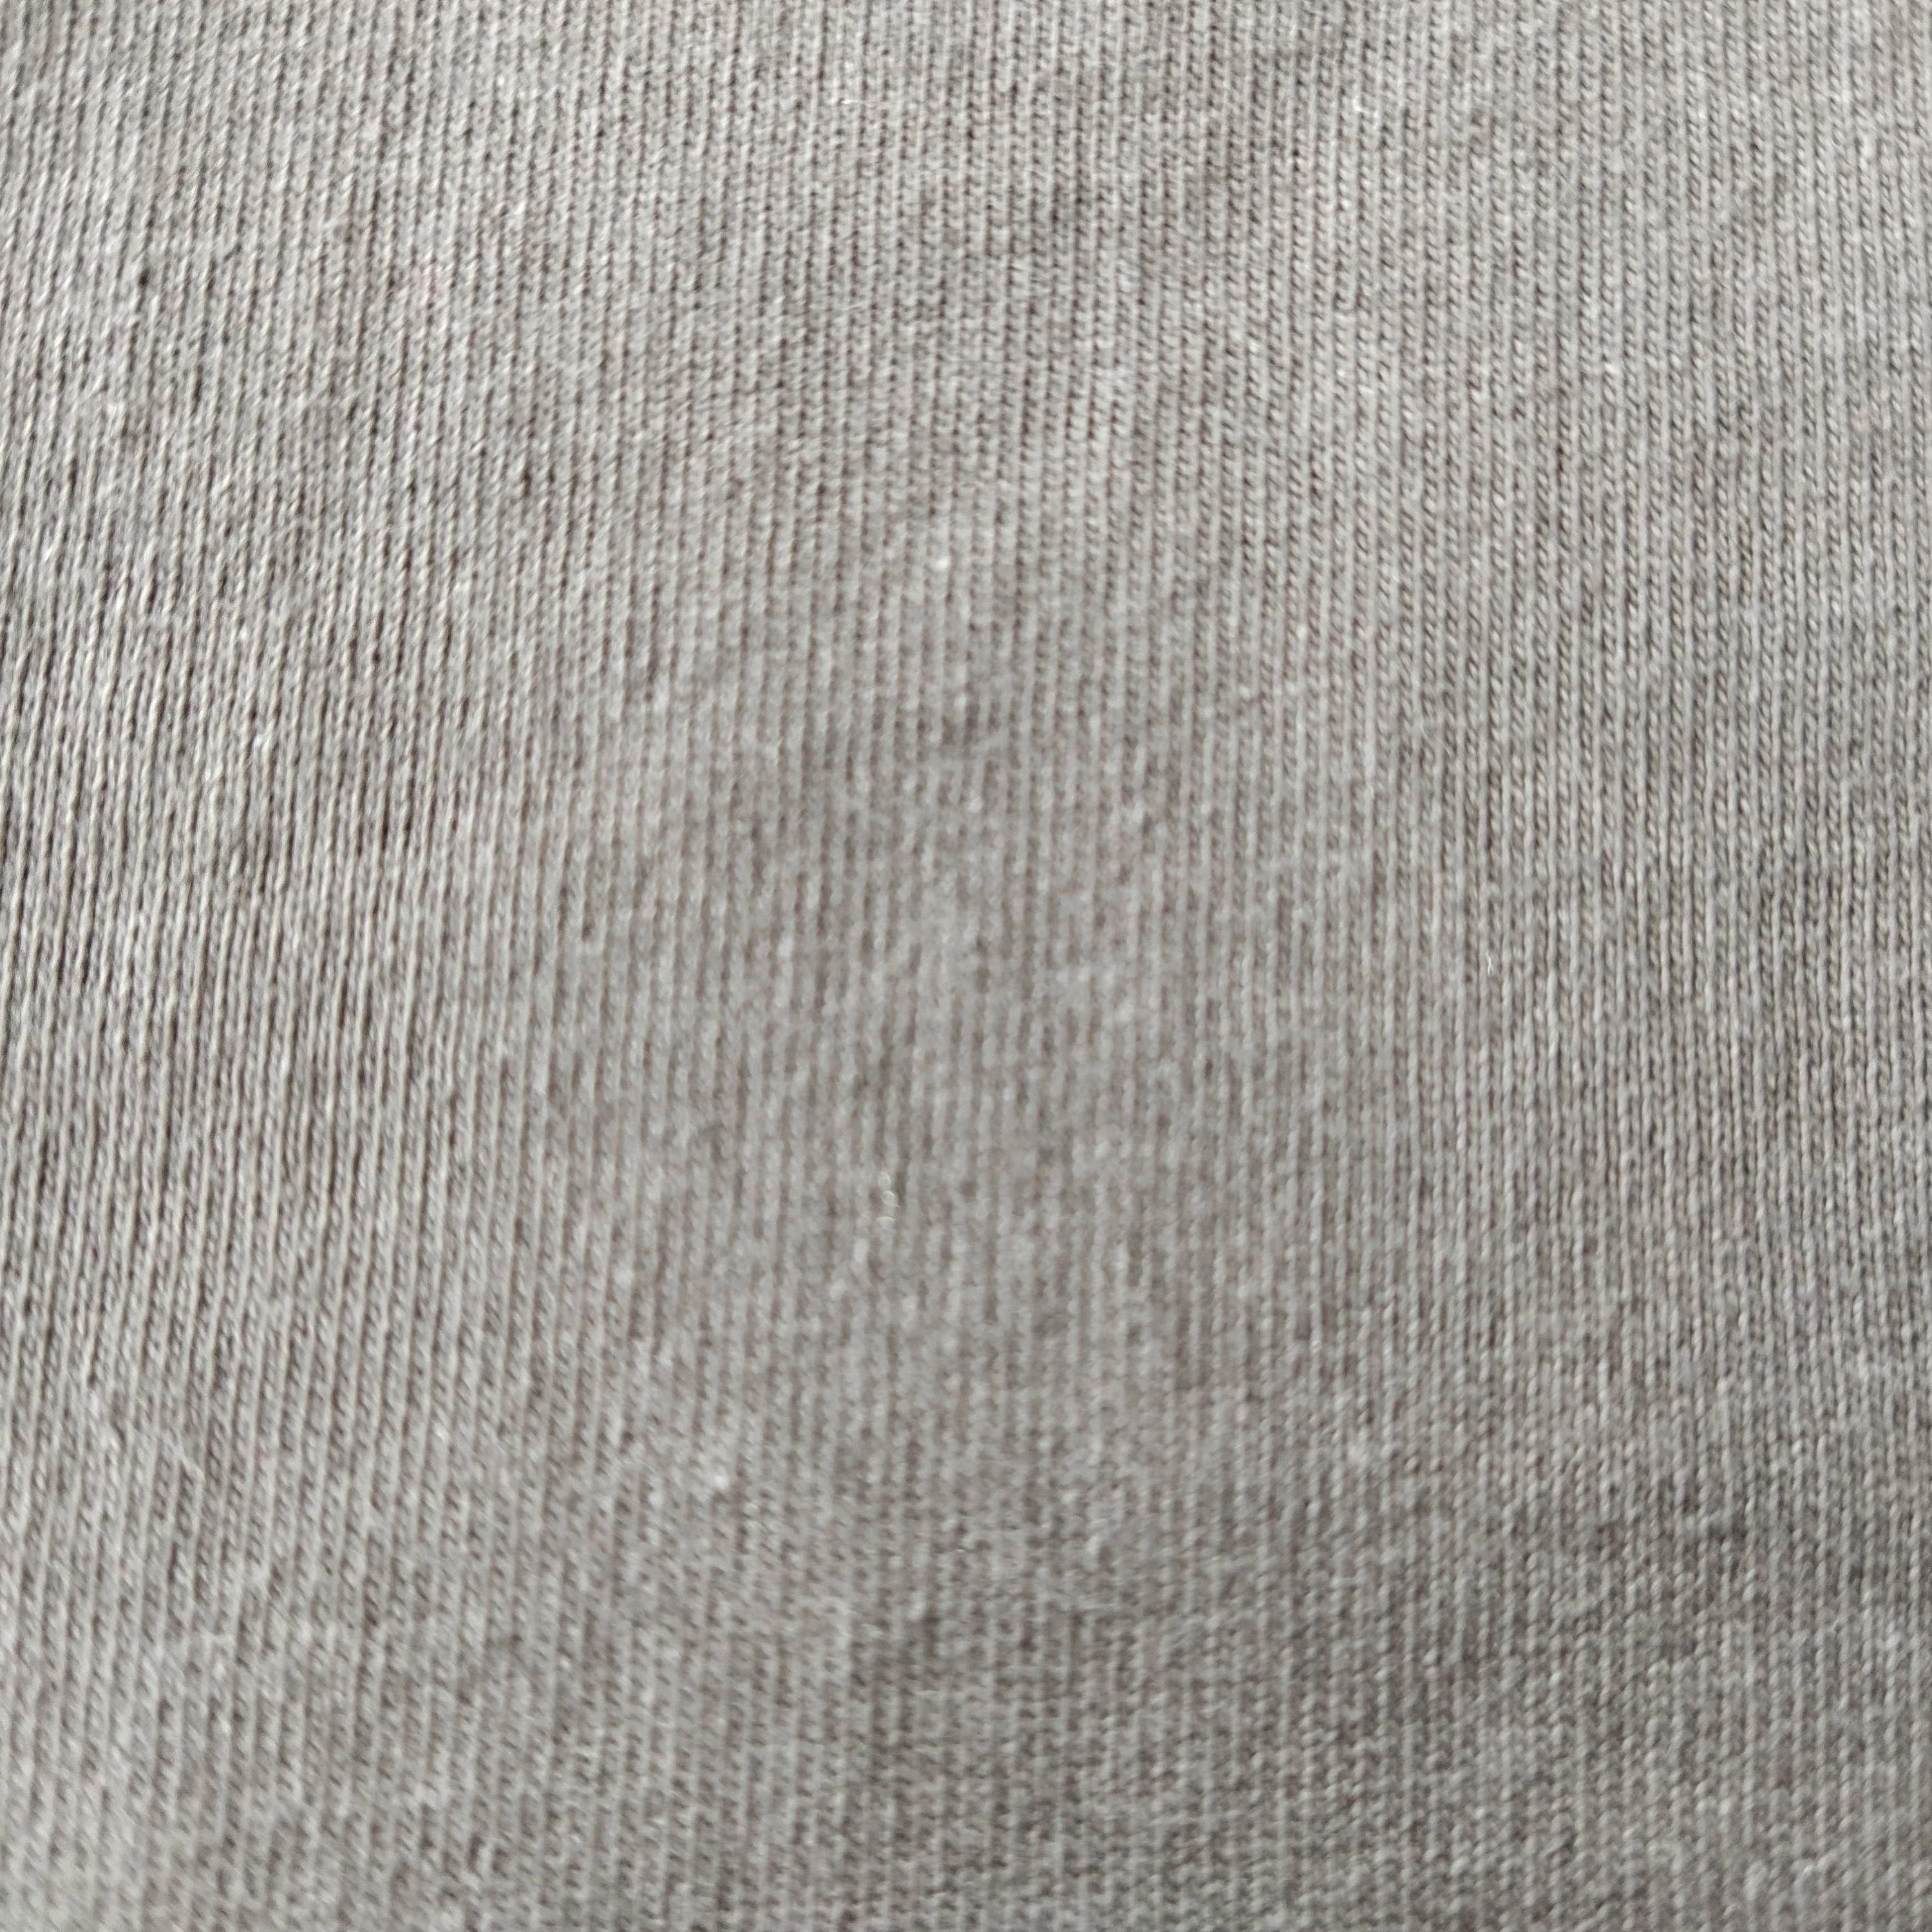 Linen Like 100% Cotton Solid 16S OE Single Jersey Knit Fabric for T Shirt or Sleeveless Tank From China factory